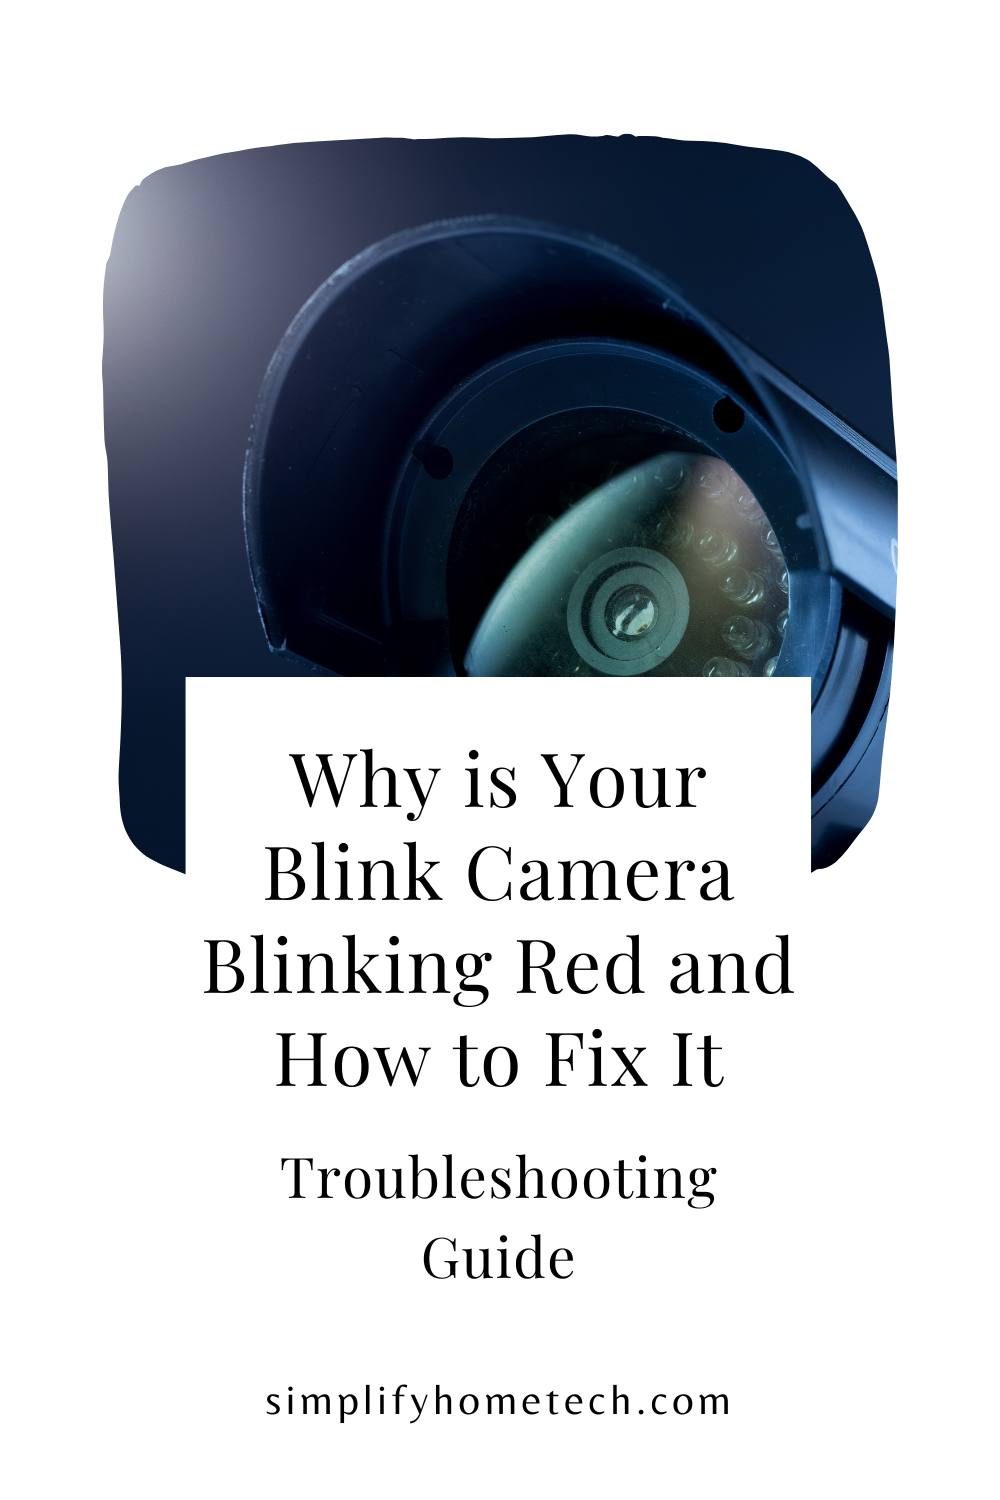 Why is Your Blink Camera Blinking Red and How to Fix It